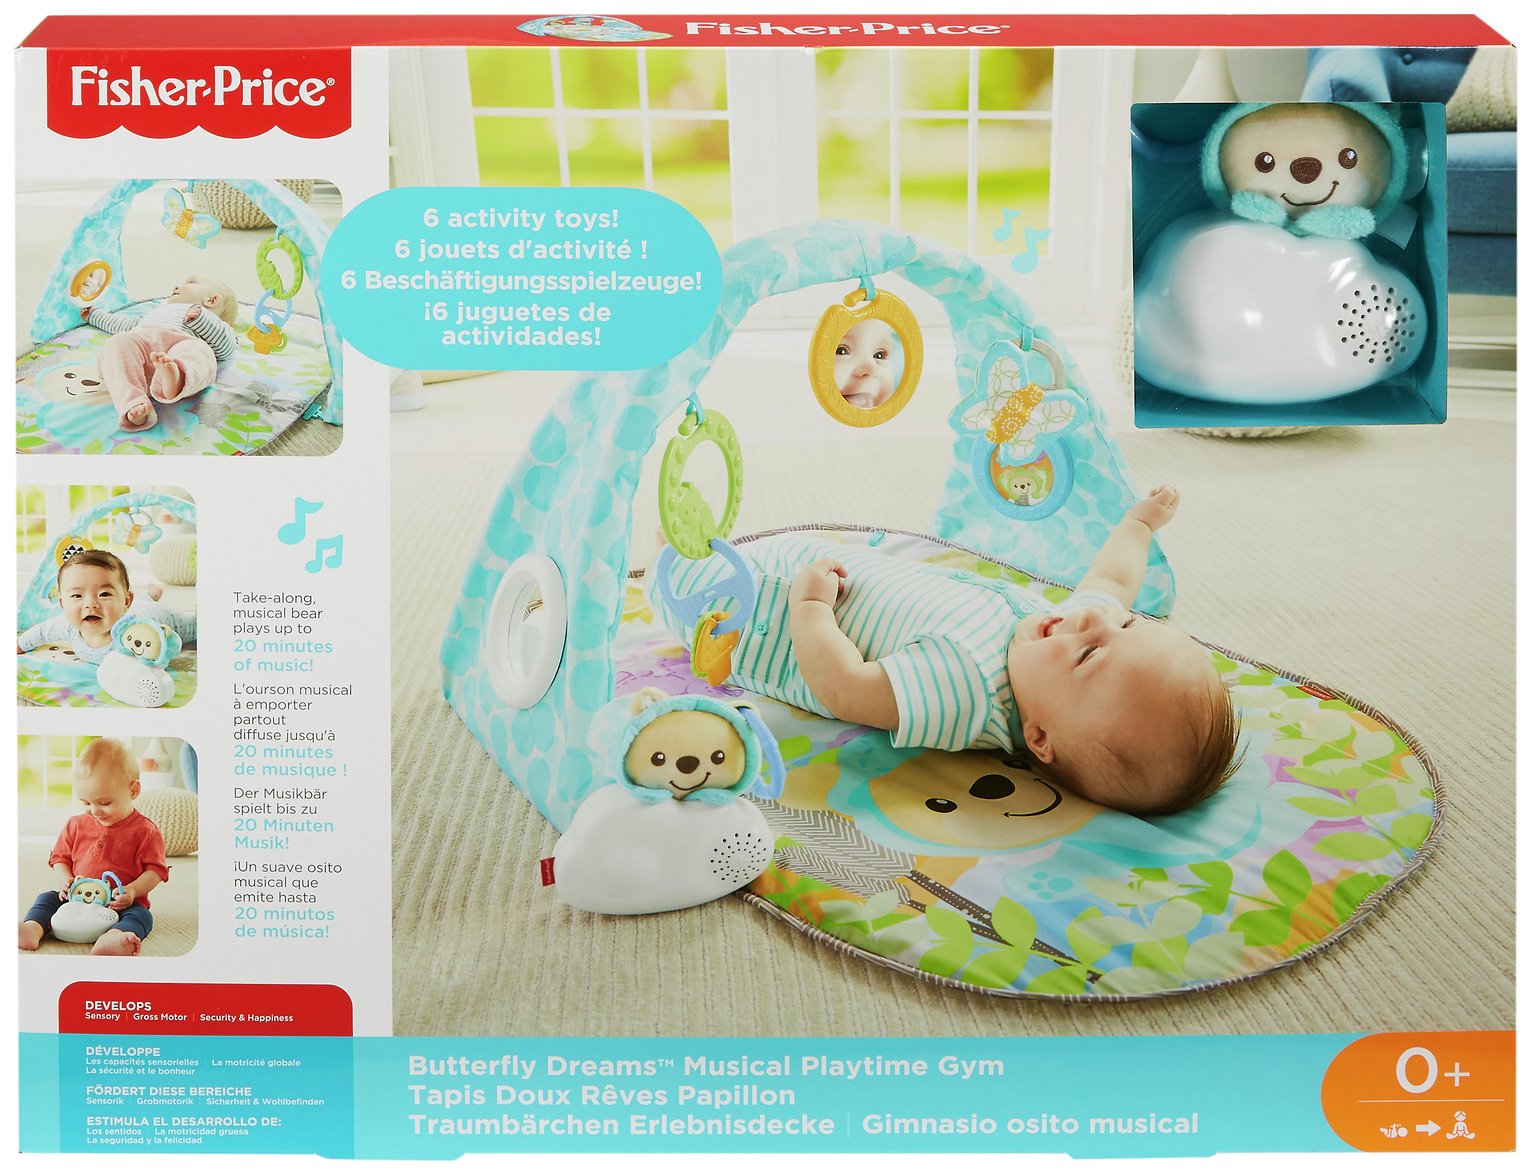 Fisher-Price Butterfly Dreams Musical Playtime Gym Review